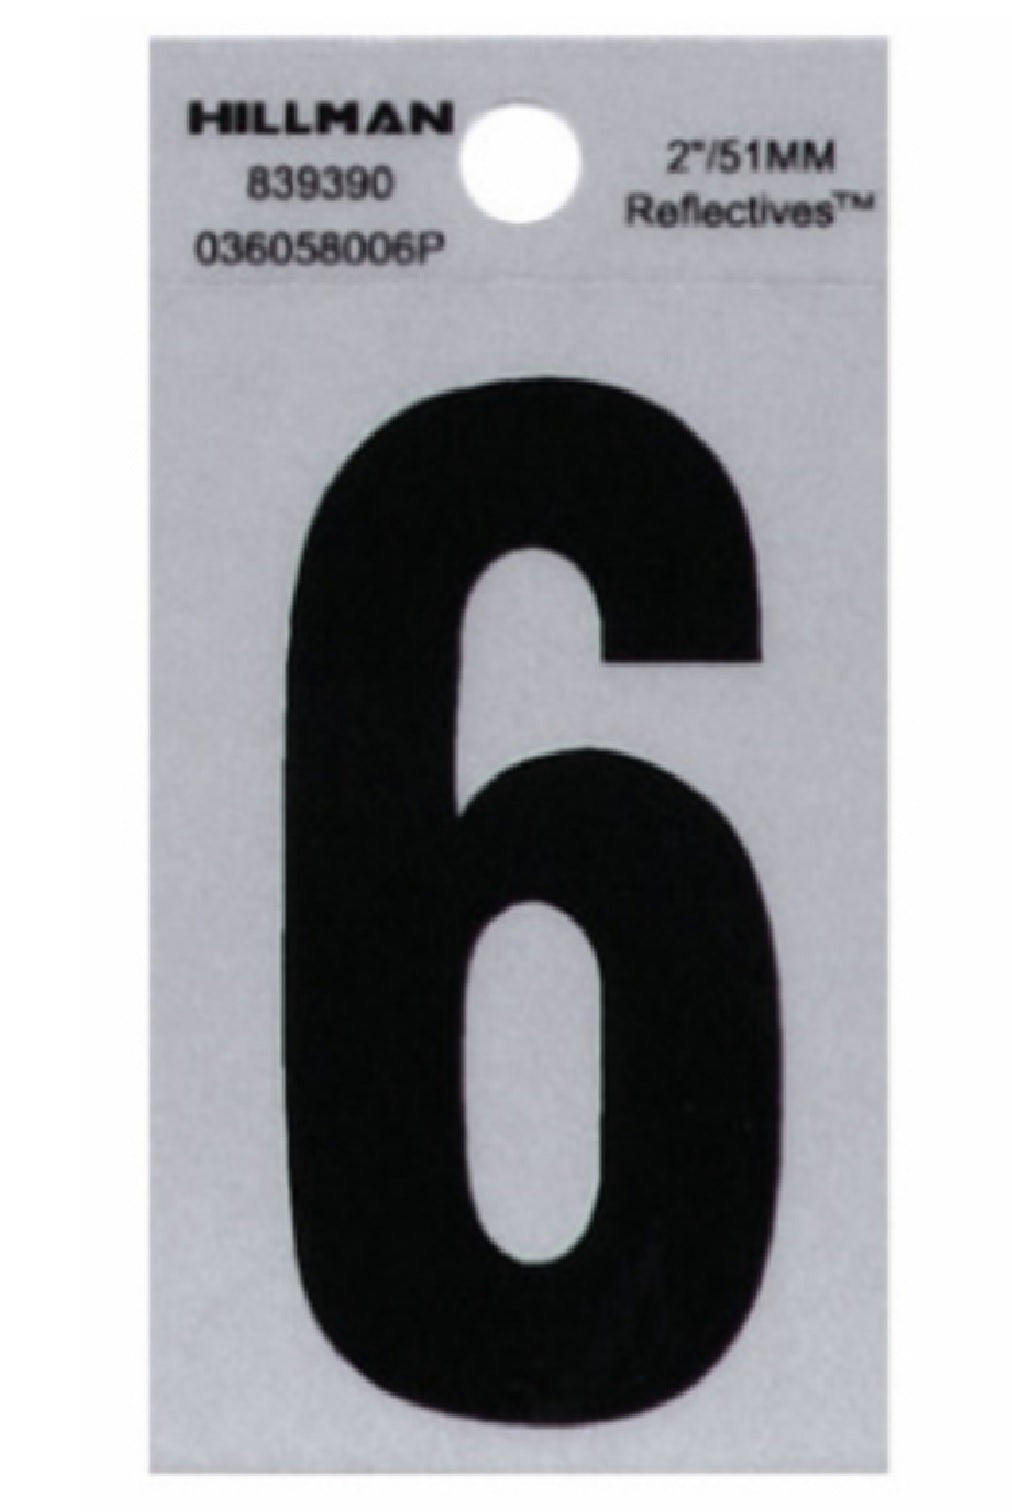 Hillman Fasteners 839390 Adhesive House Number 6 Black and Silver Reflective, 2 Inch